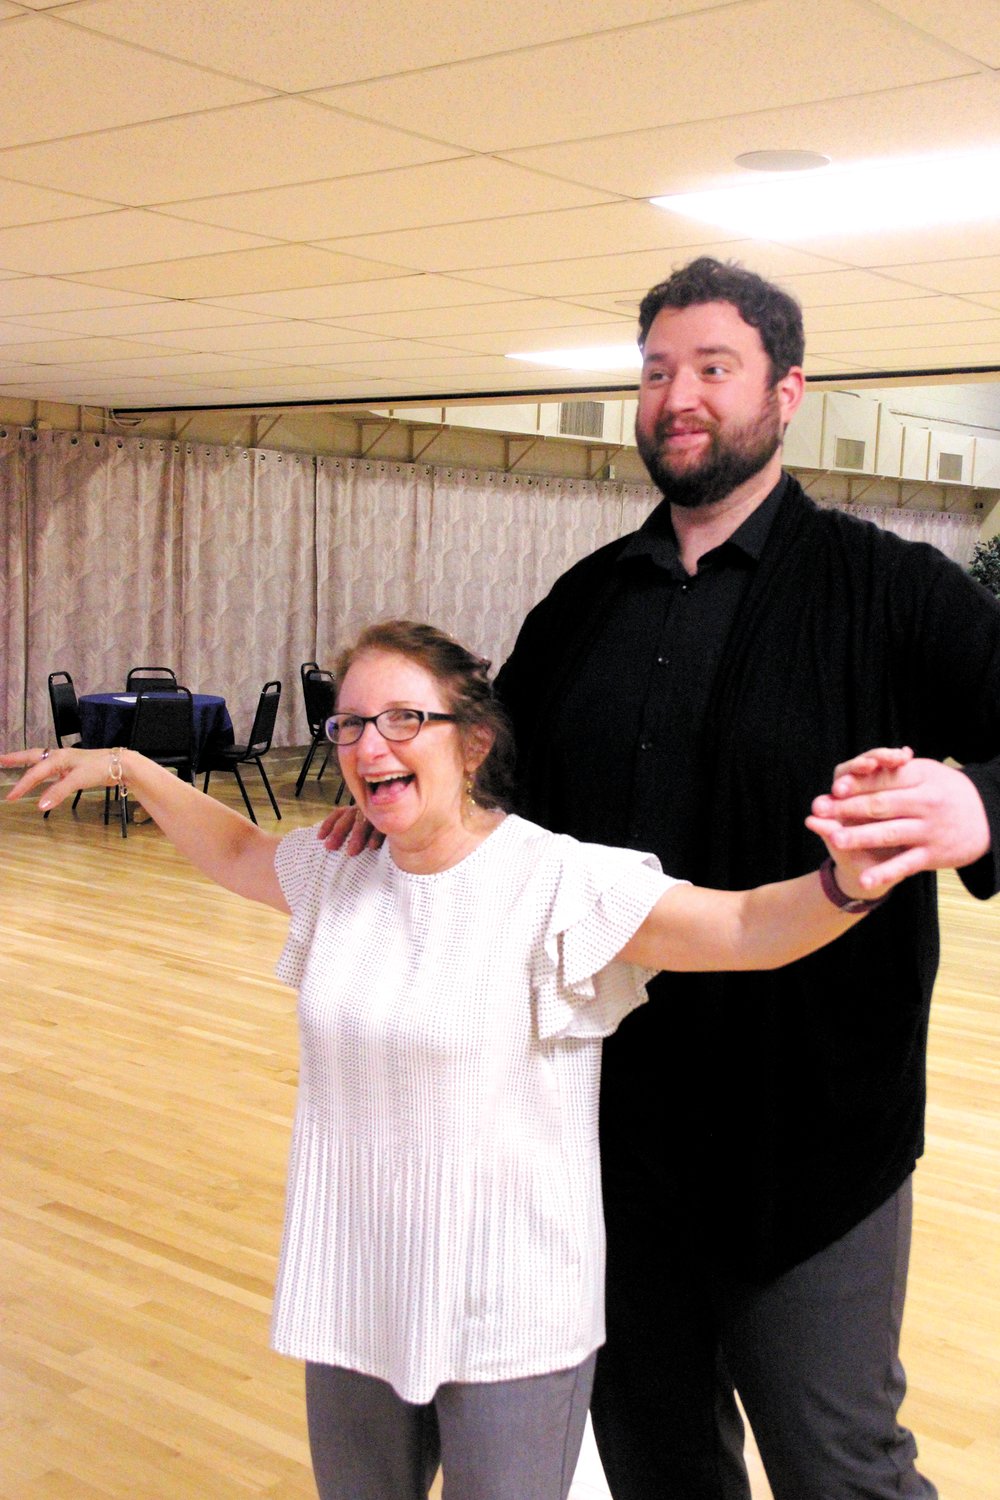 SILENT STEPS:  Terri Brophy and Noah Carsten step through their routine during one of the weekly sessions at Dancing Feeling. The couple rehearses without music, which they said is playing in their minds as they cover the floor. (Warwick Beacon photos)